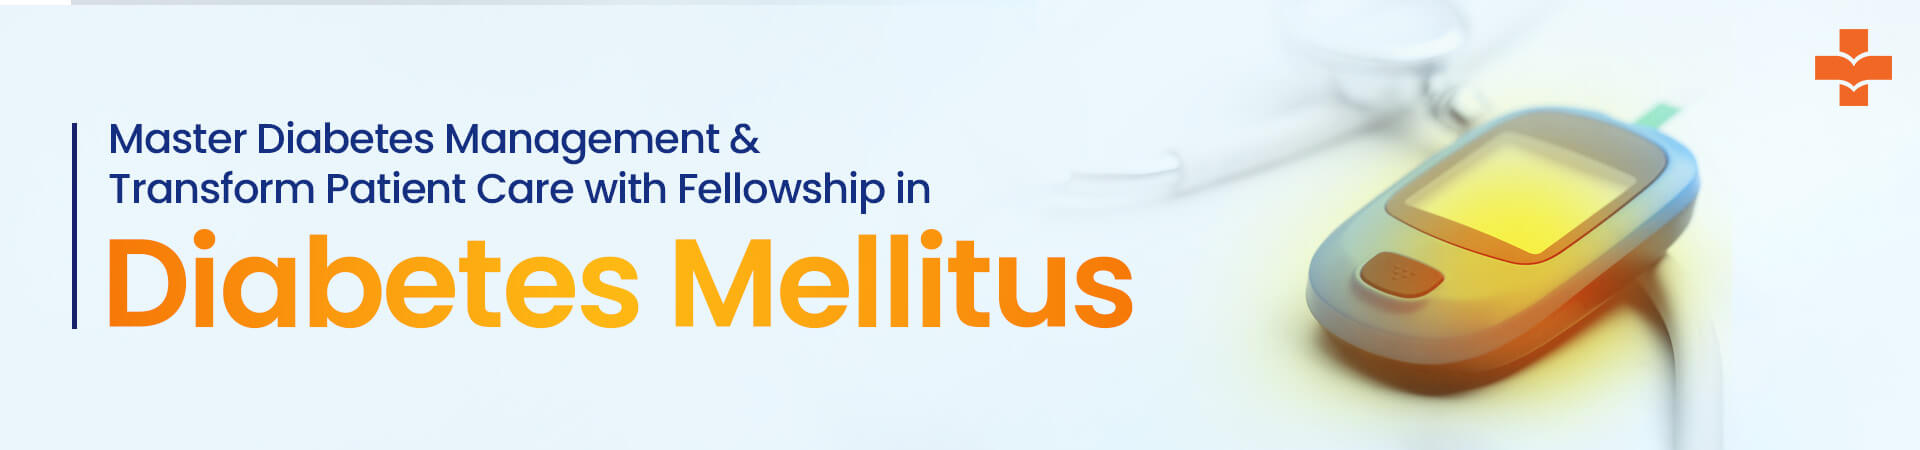 Enhance patient outcomes through a Fellowship in Diabetes Mellitus. Explore how this specialized program contributes to improved care and expertise in managing diabetes.